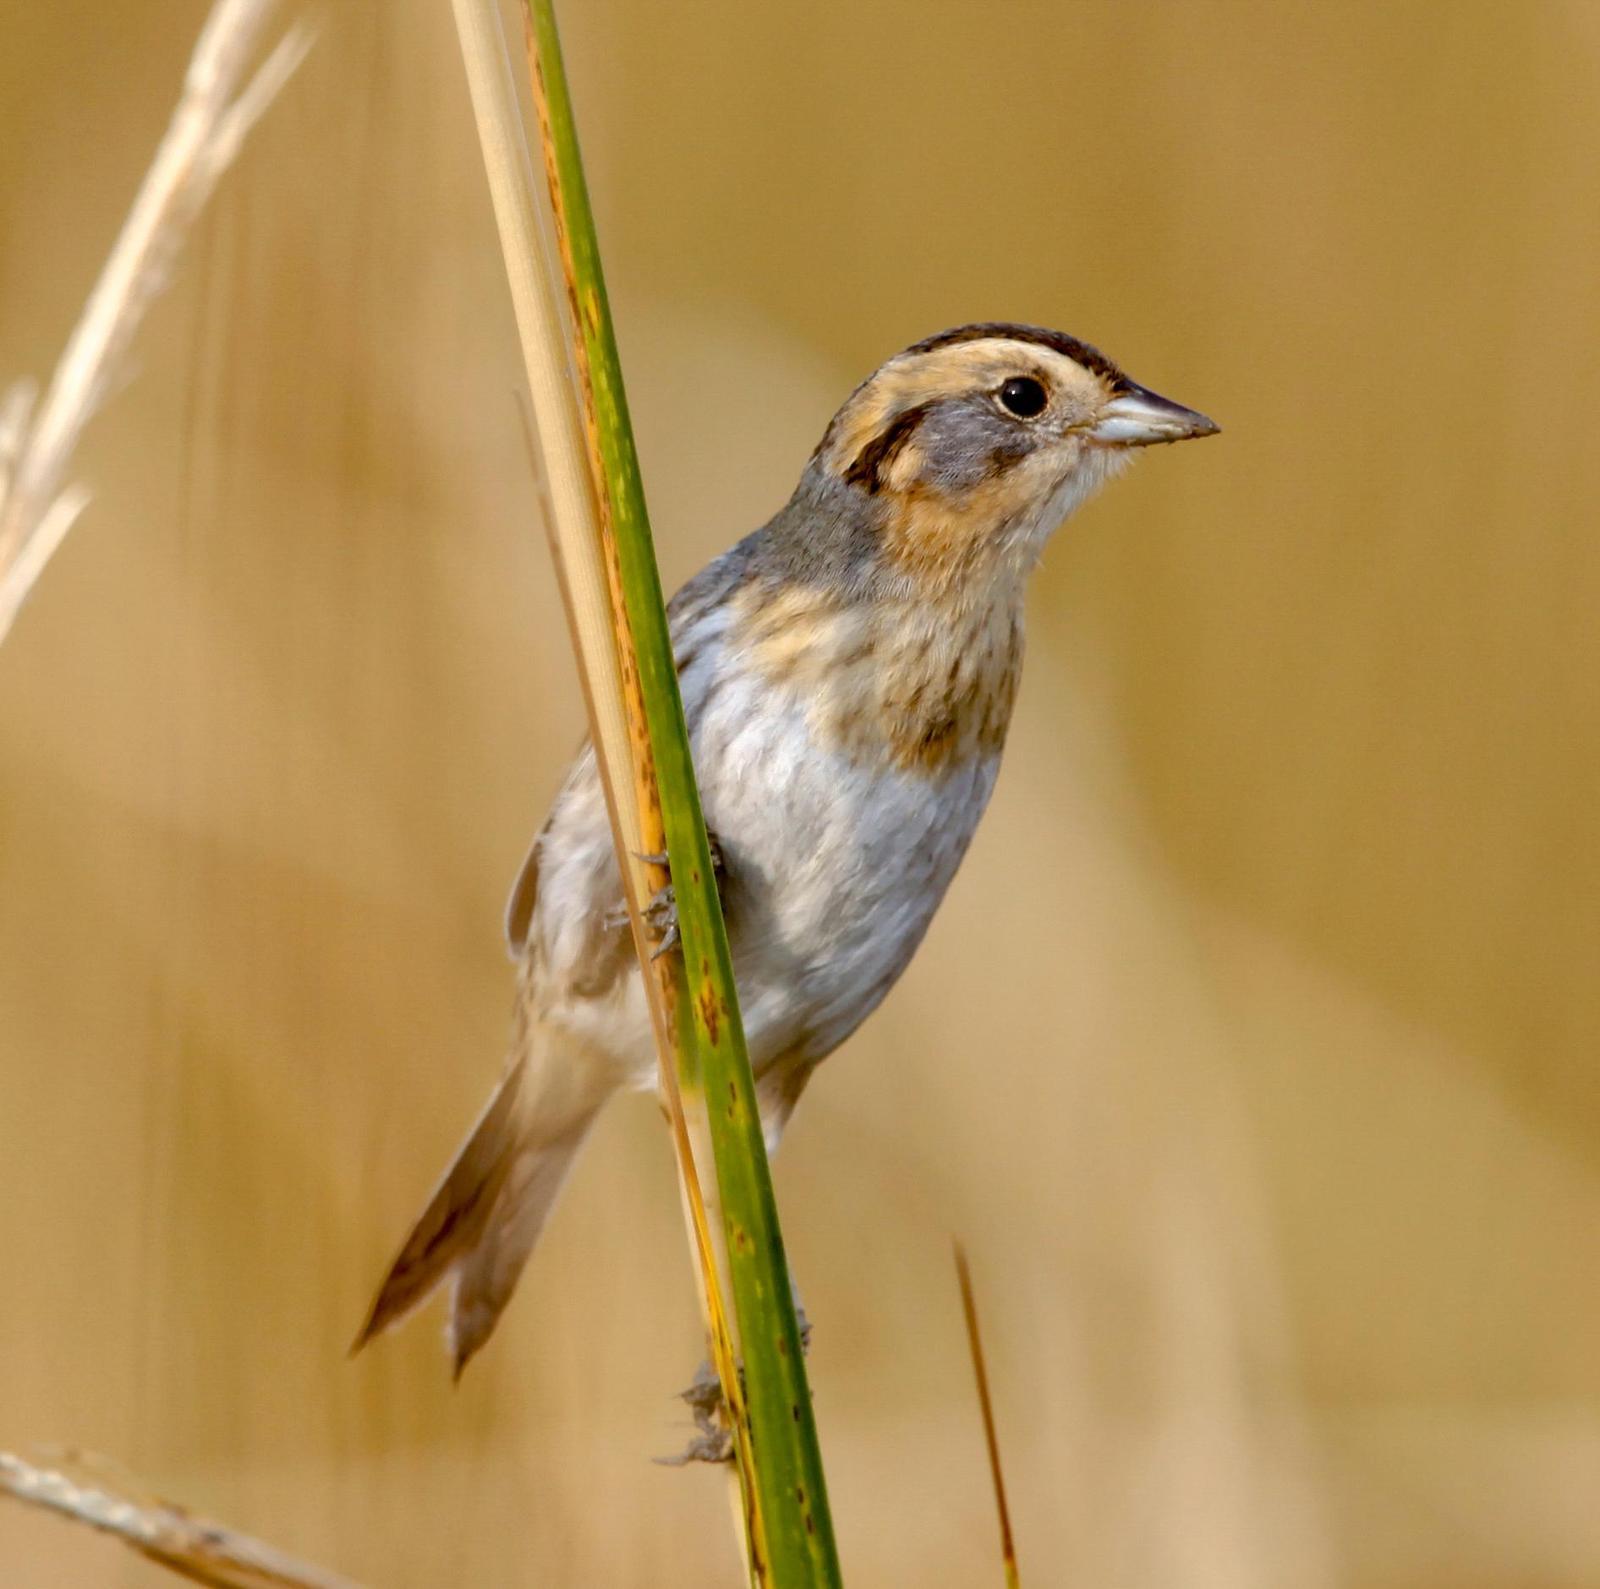 Nelson's Sparrow Photo by Lucy Wightman